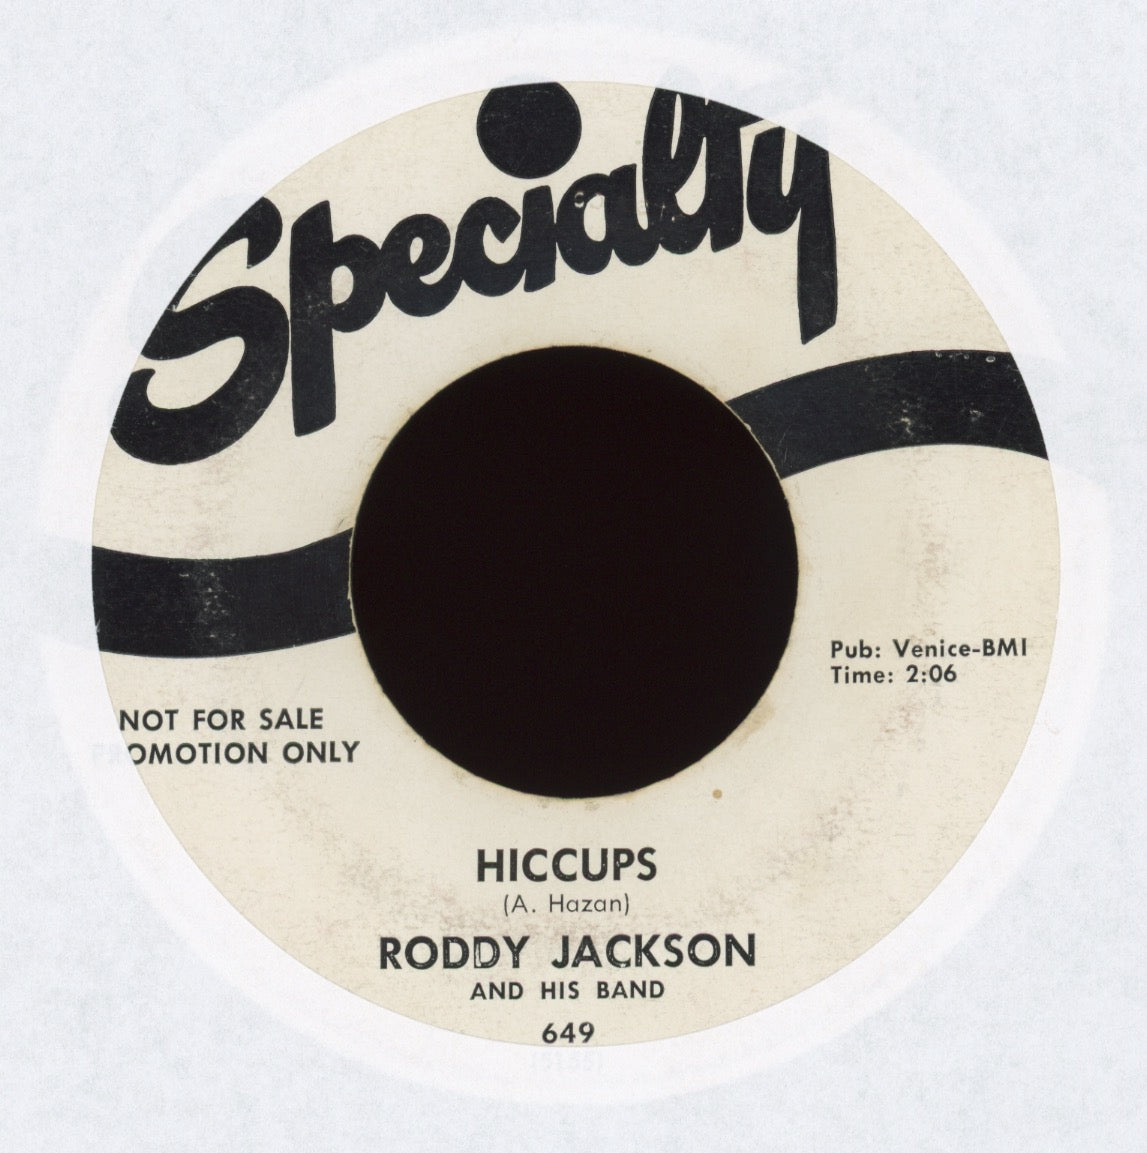 Roddy Jackson And His Band - Hiccups on Specialty Promo